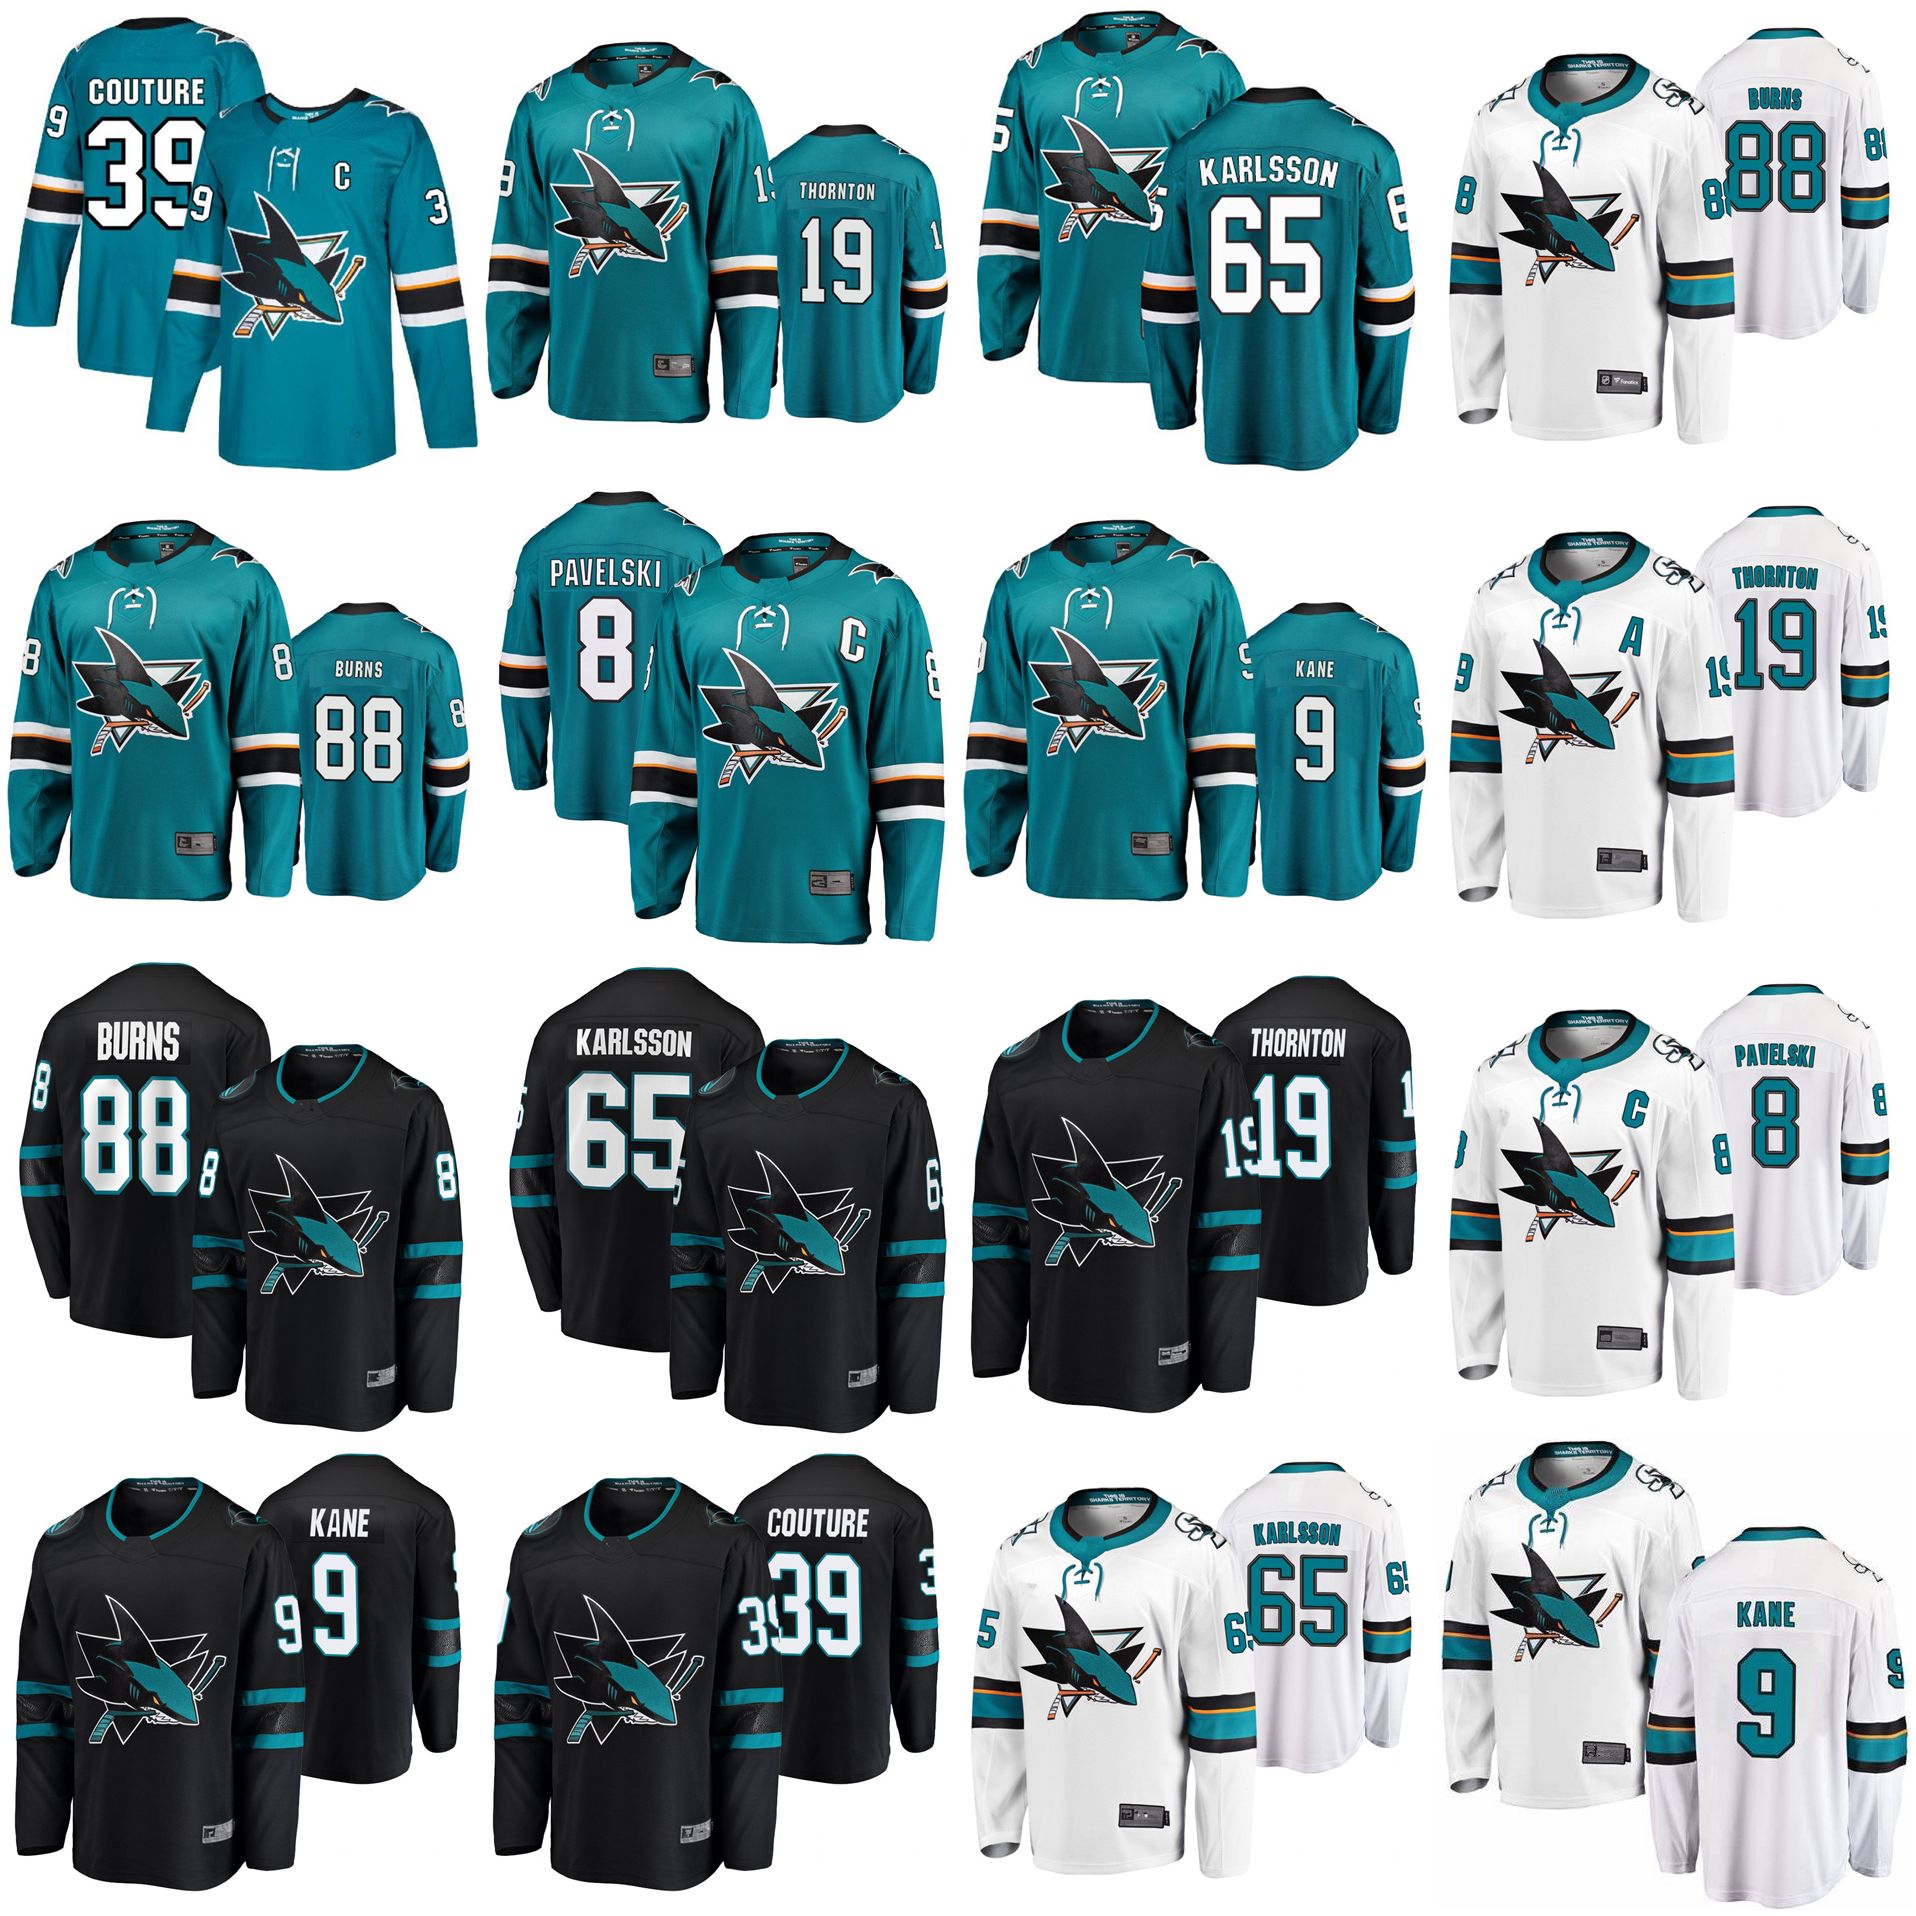 

San Jose Sharks Jerseys Mens 88 Brent Burns Jersey 39 Logan Couture Womens 65 Erik Karlsson Ice Hockey Jerseys Youth Stitched, Youth teal home